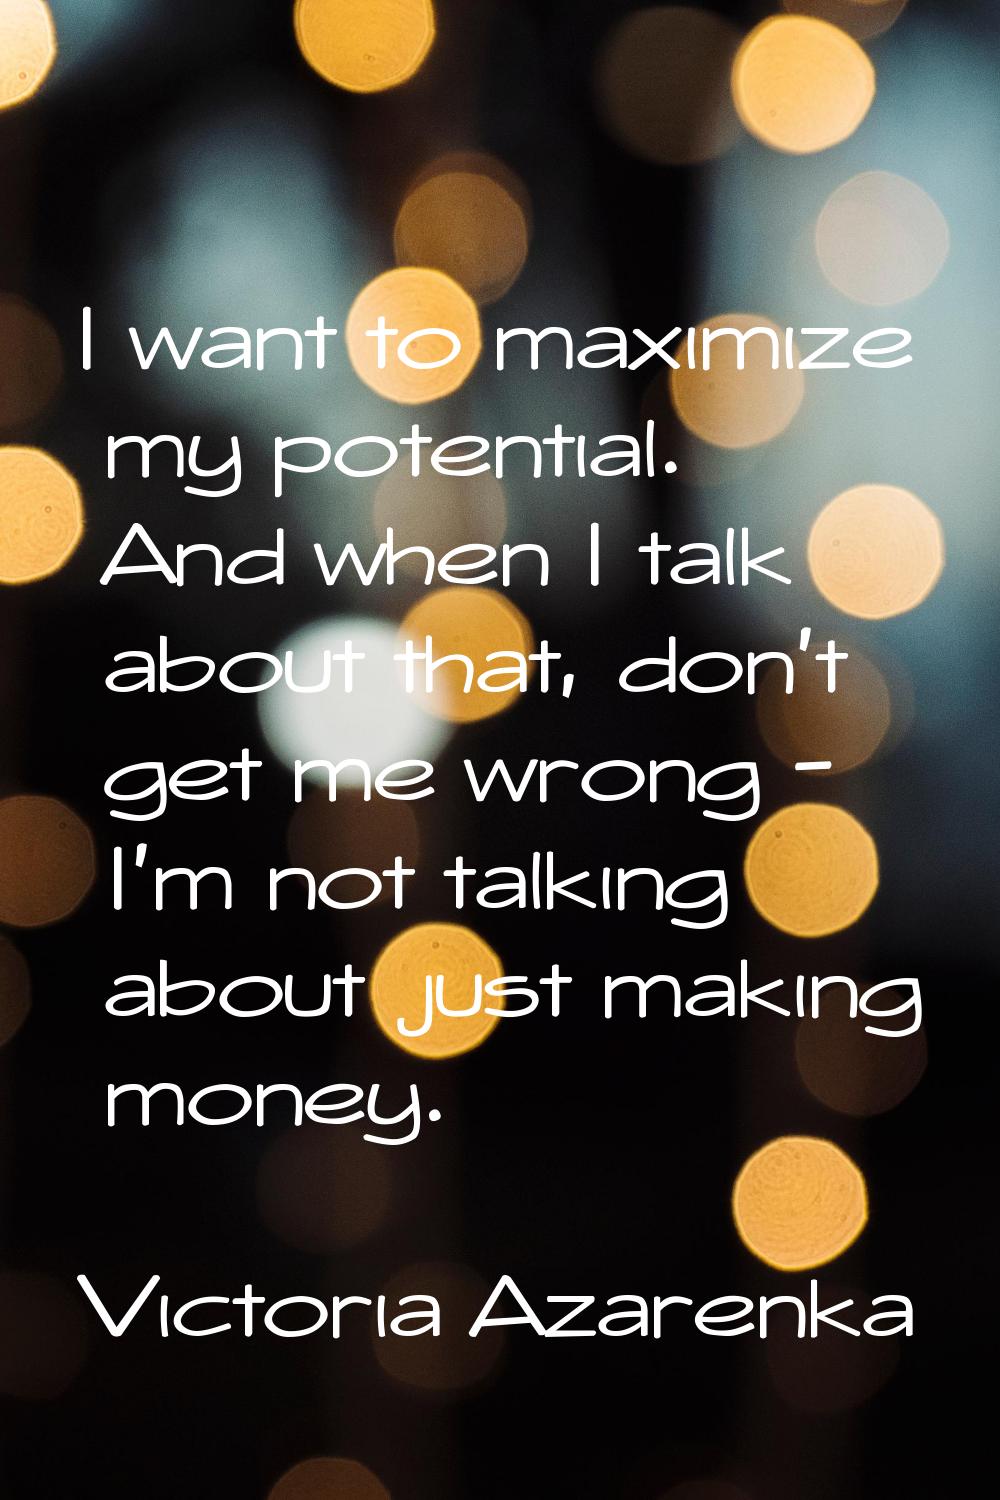 I want to maximize my potential. And when I talk about that, don't get me wrong - I'm not talking a